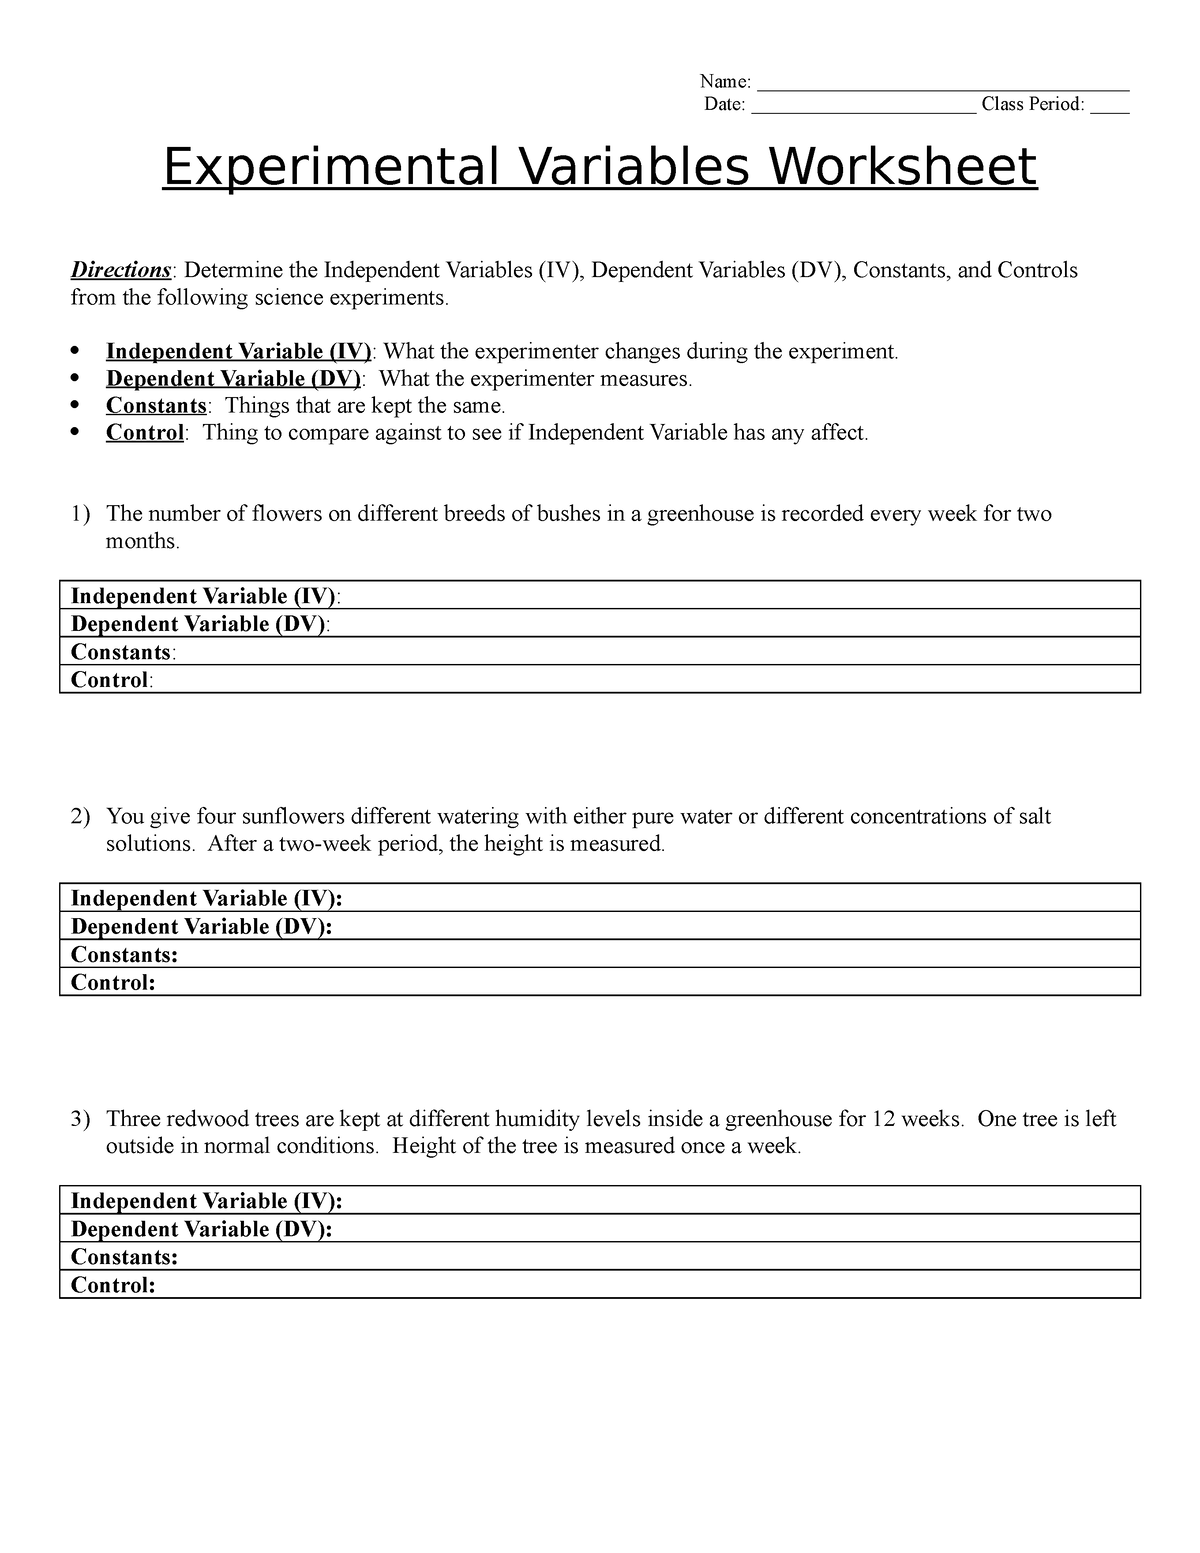 identifying controls and variables experimental design worksheet answers